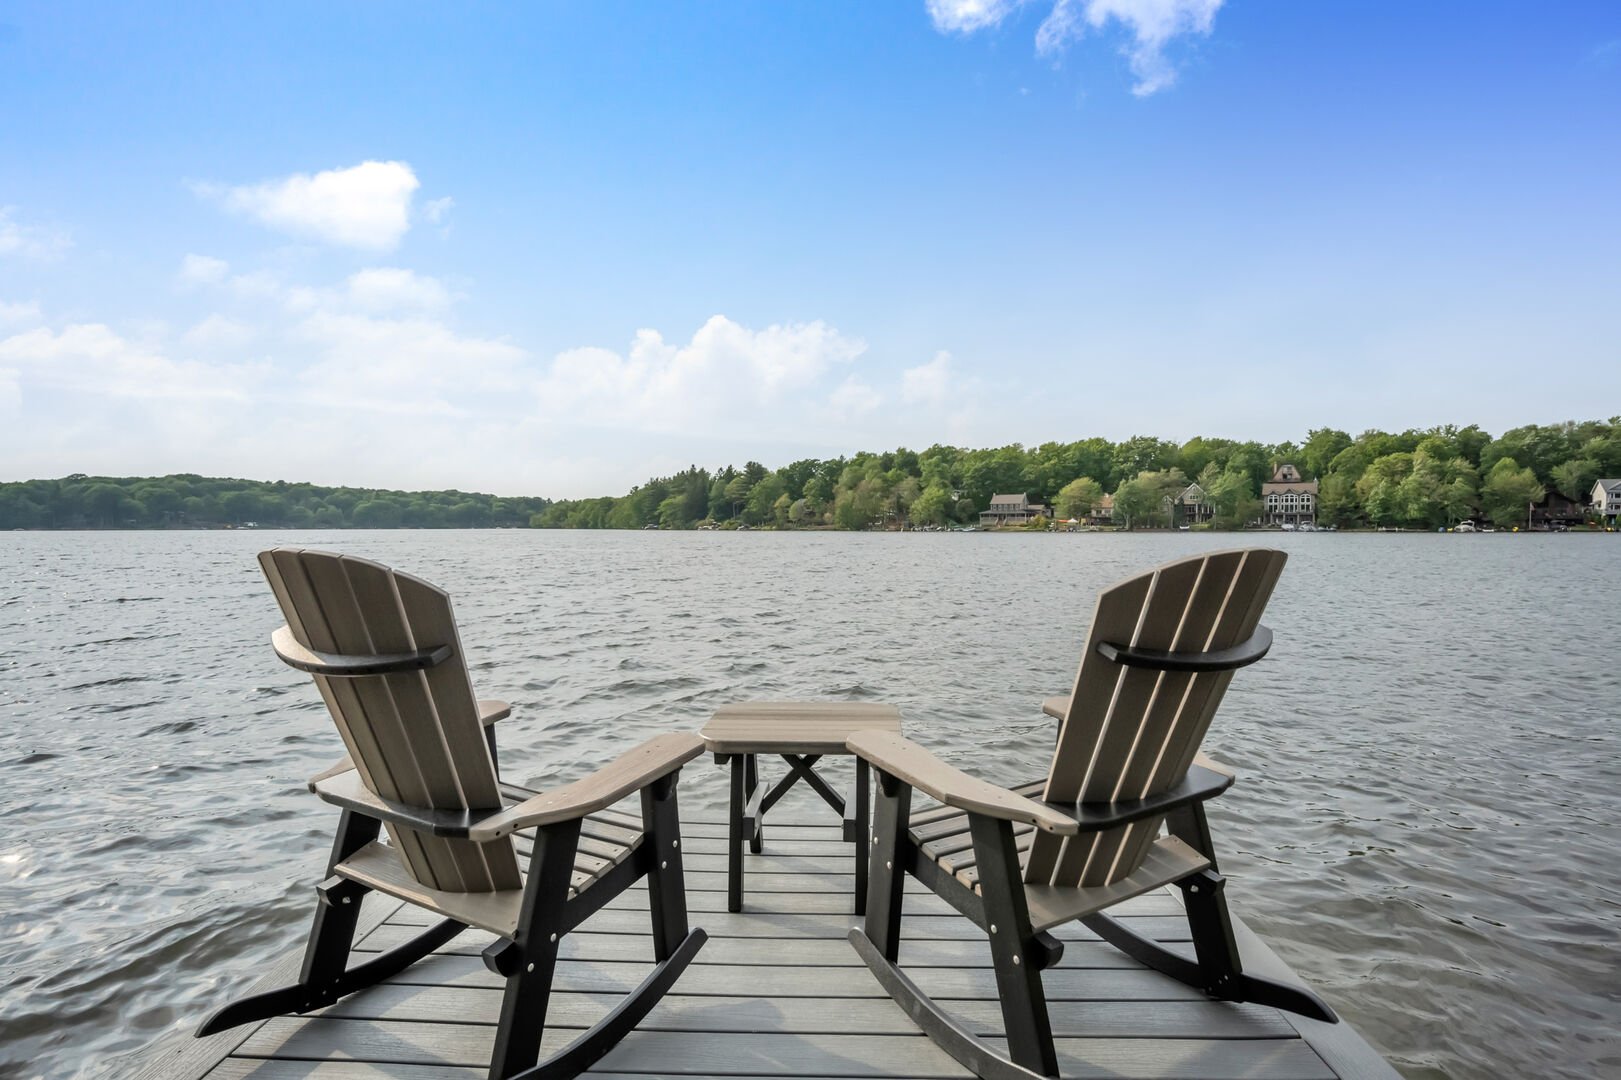 Sipping...
Your Morning Cup of Coffee will taste Better on the Dock.